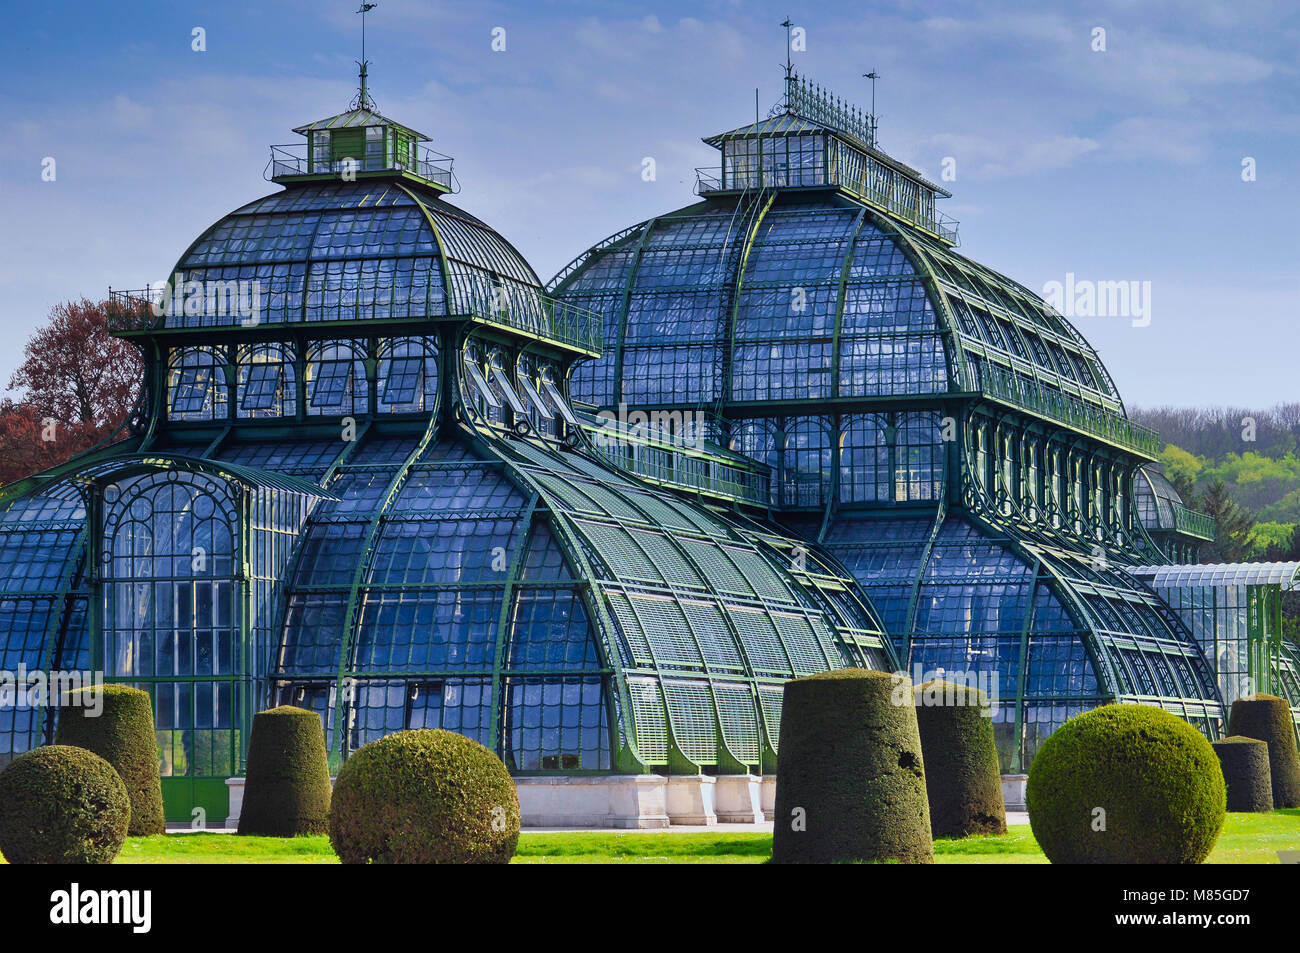 Green house Palmenhaus Schonbrunn in Schonbrunn palace park. Opened in 1882, it is the most prominent of the four greenhouses in Schonbrunn Stock Photo